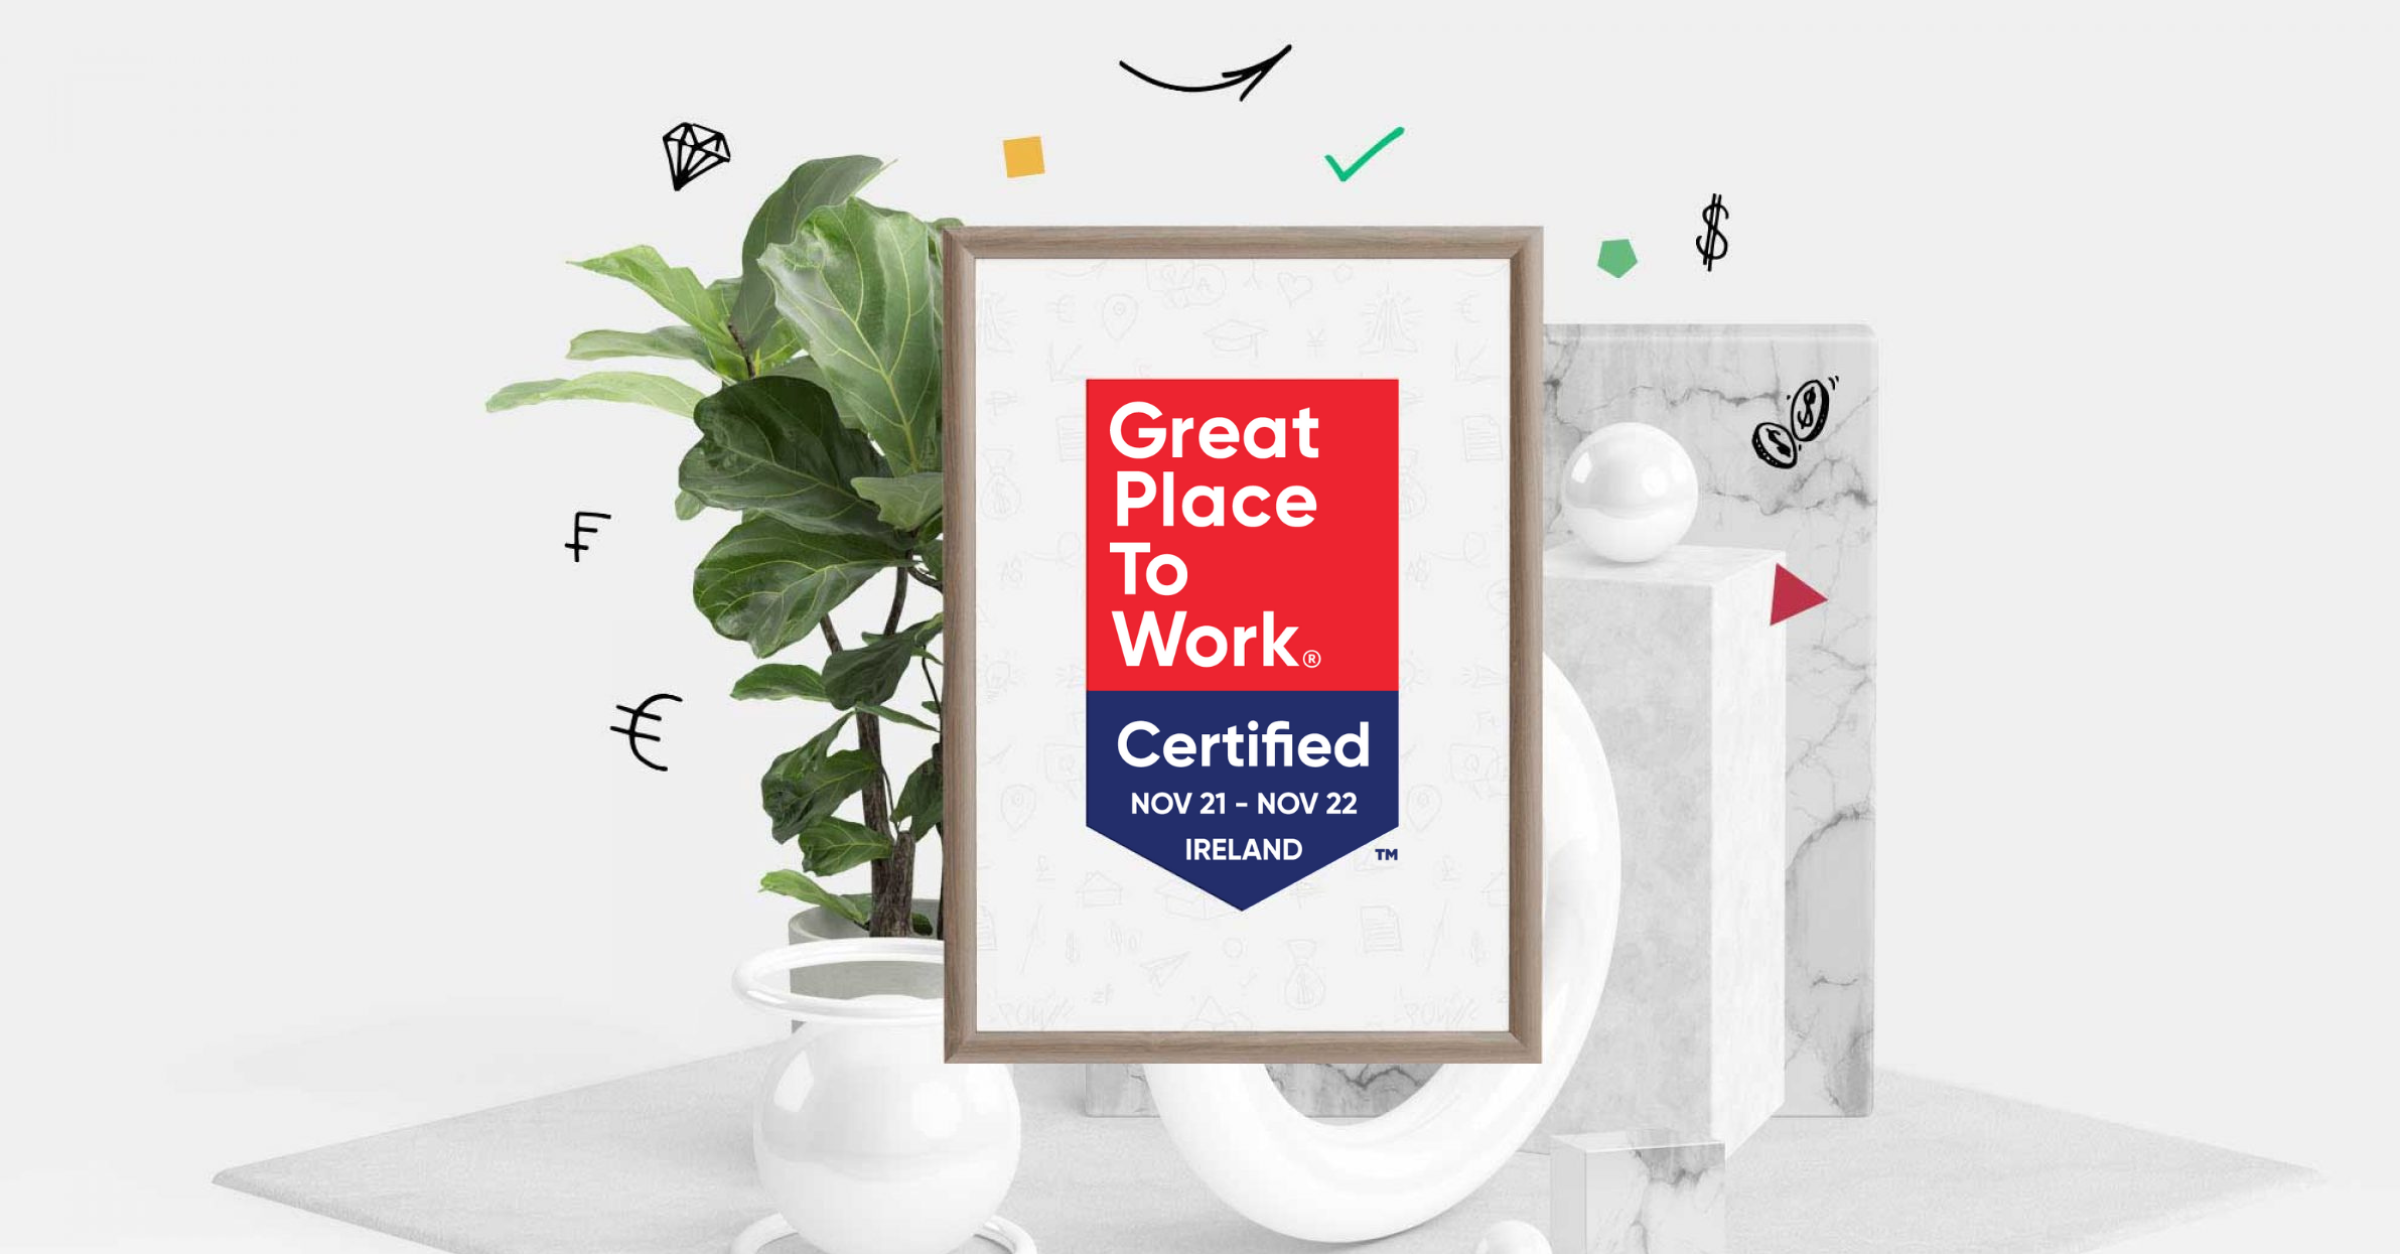 We’re a certified Great Place to Work® for the third consecutive year